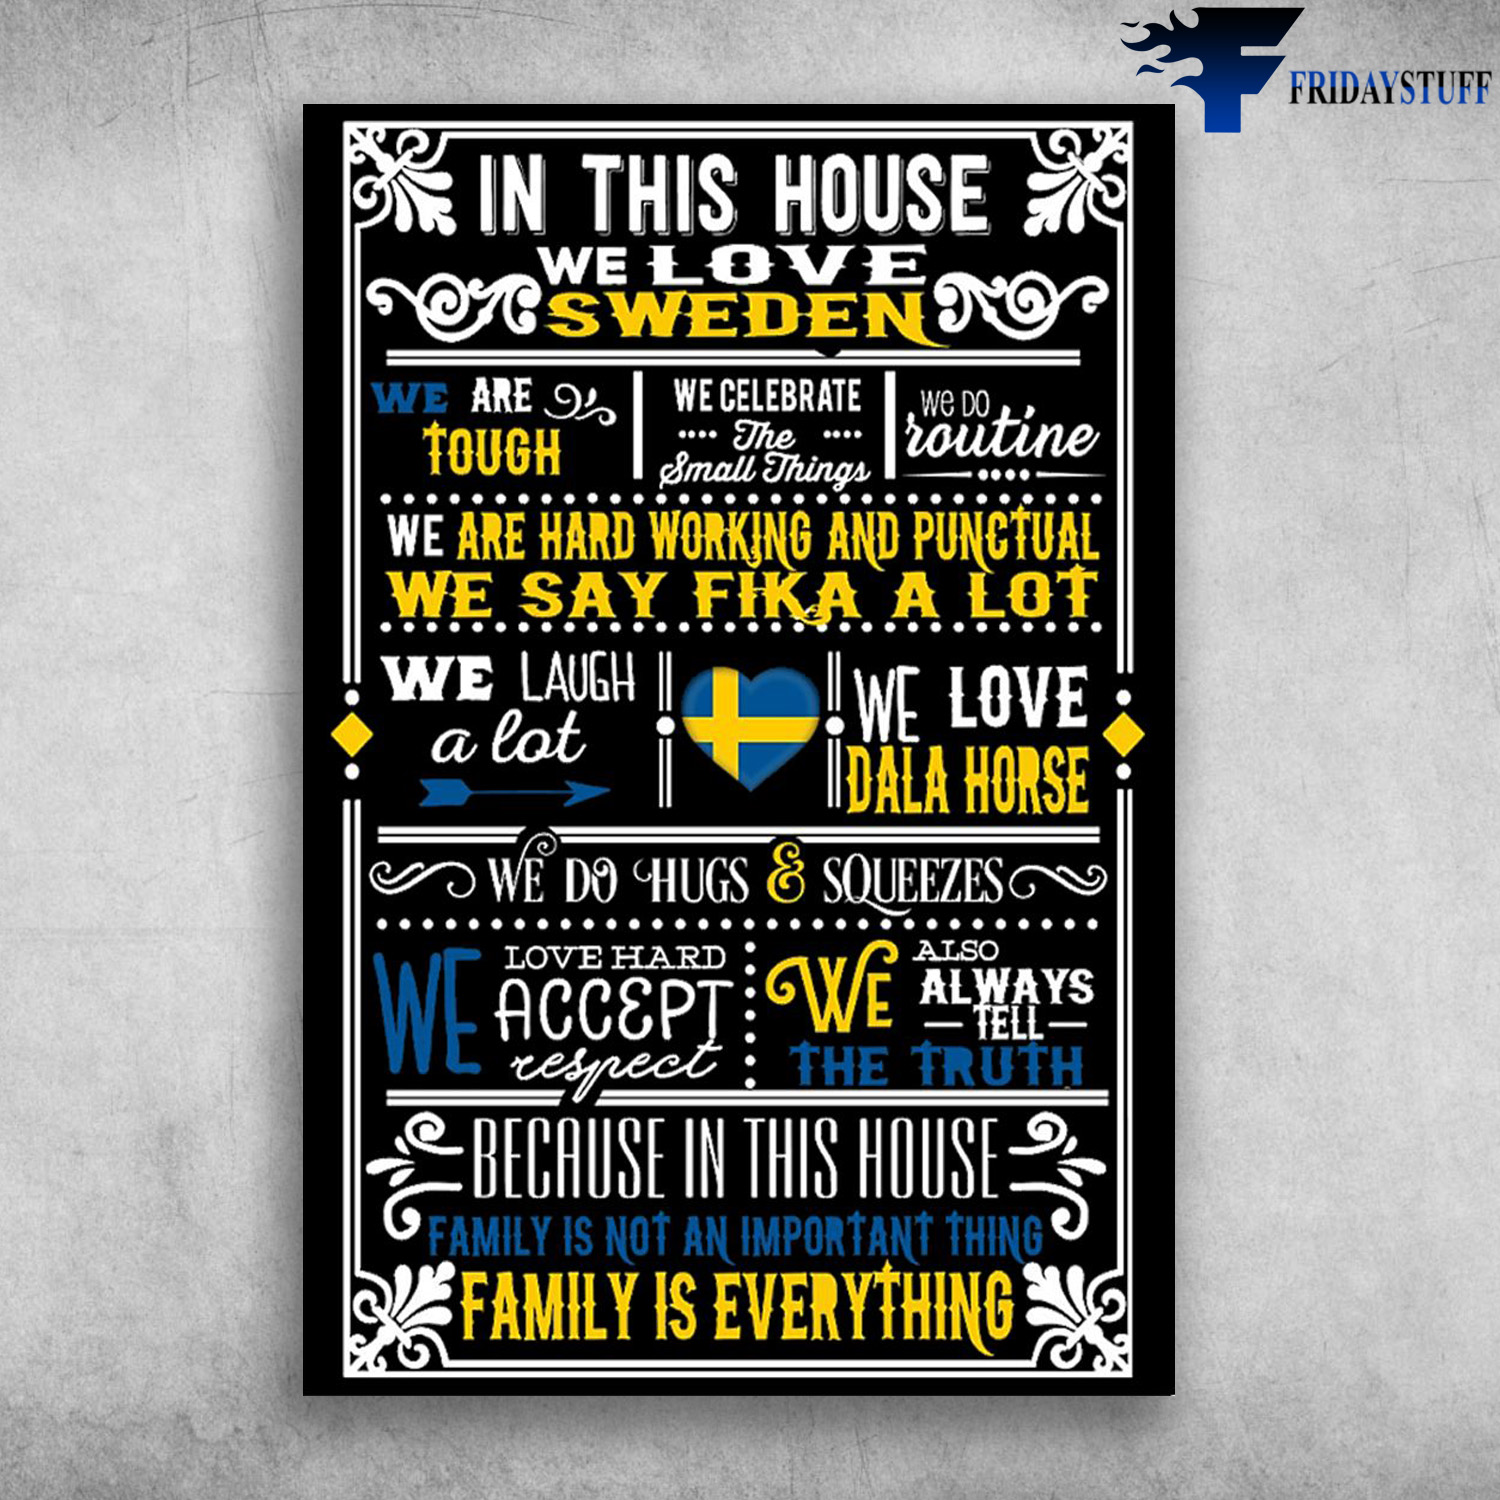 In This House - We Love Sweden, We Are Tough, We Celebrate The Small Things, We Do Routine, We Are Hard Working And Punctural, We Say Fika A Lot, We Laugh A Lot, We Love Dala Horse, Family Is Everything